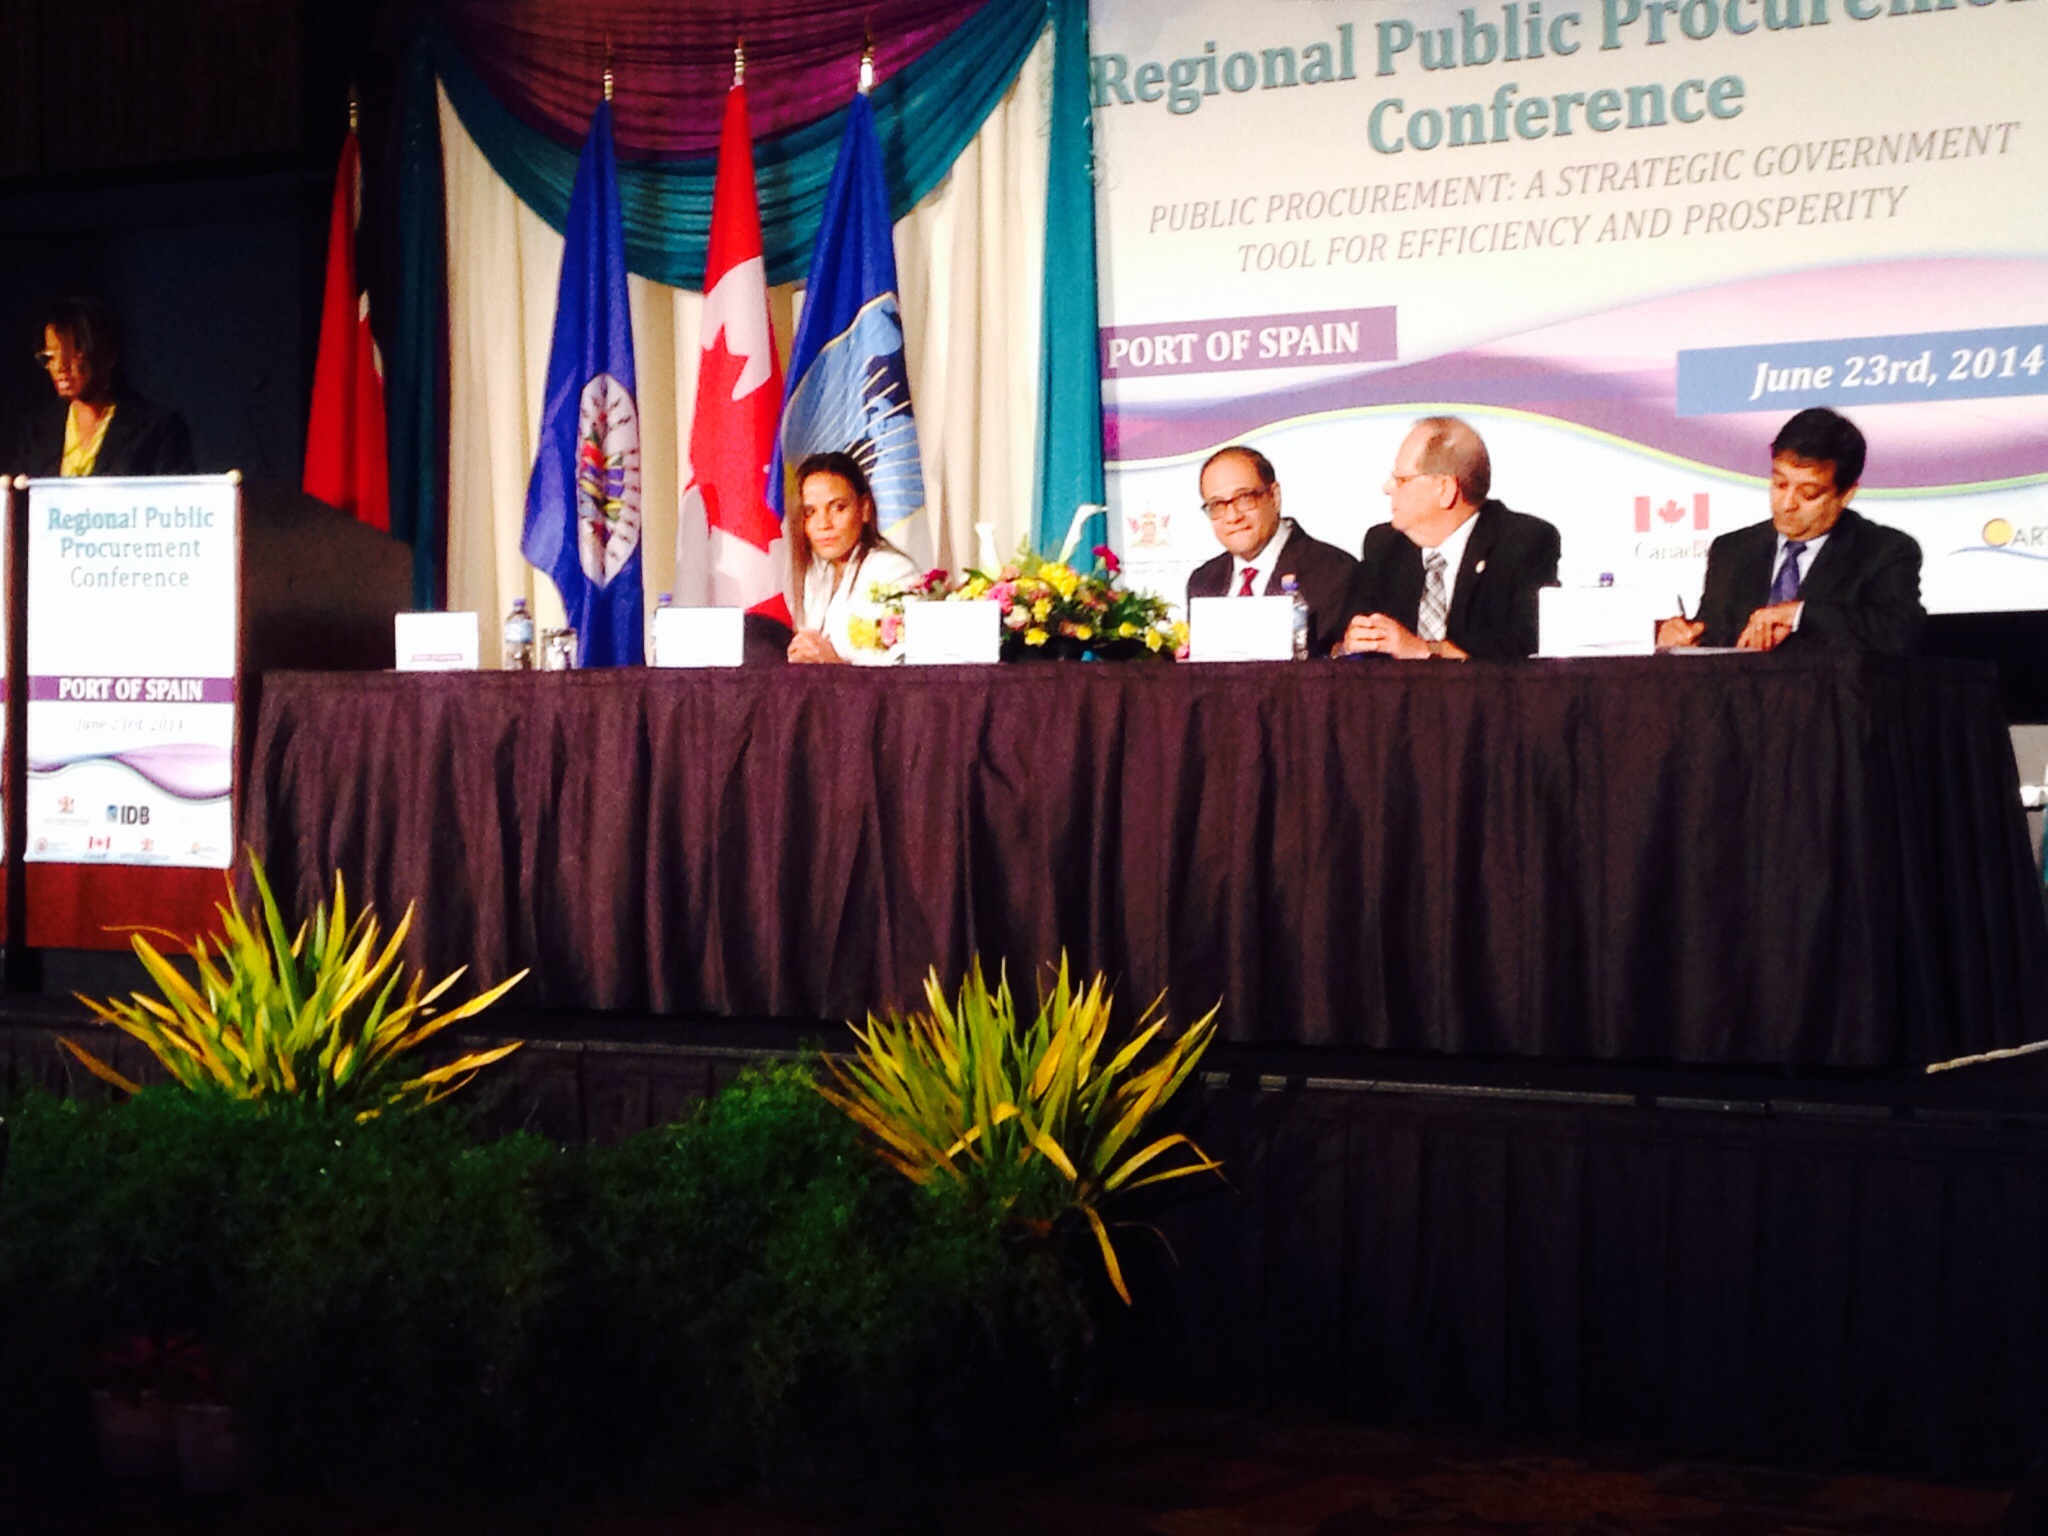 OAS supports Second Sub-regional Caribbean Public Procurement Conference of the Inter-American Network on Government Procurement (INGP), Hyatt Regency Hotel, Port of Spain, June 23, 2014